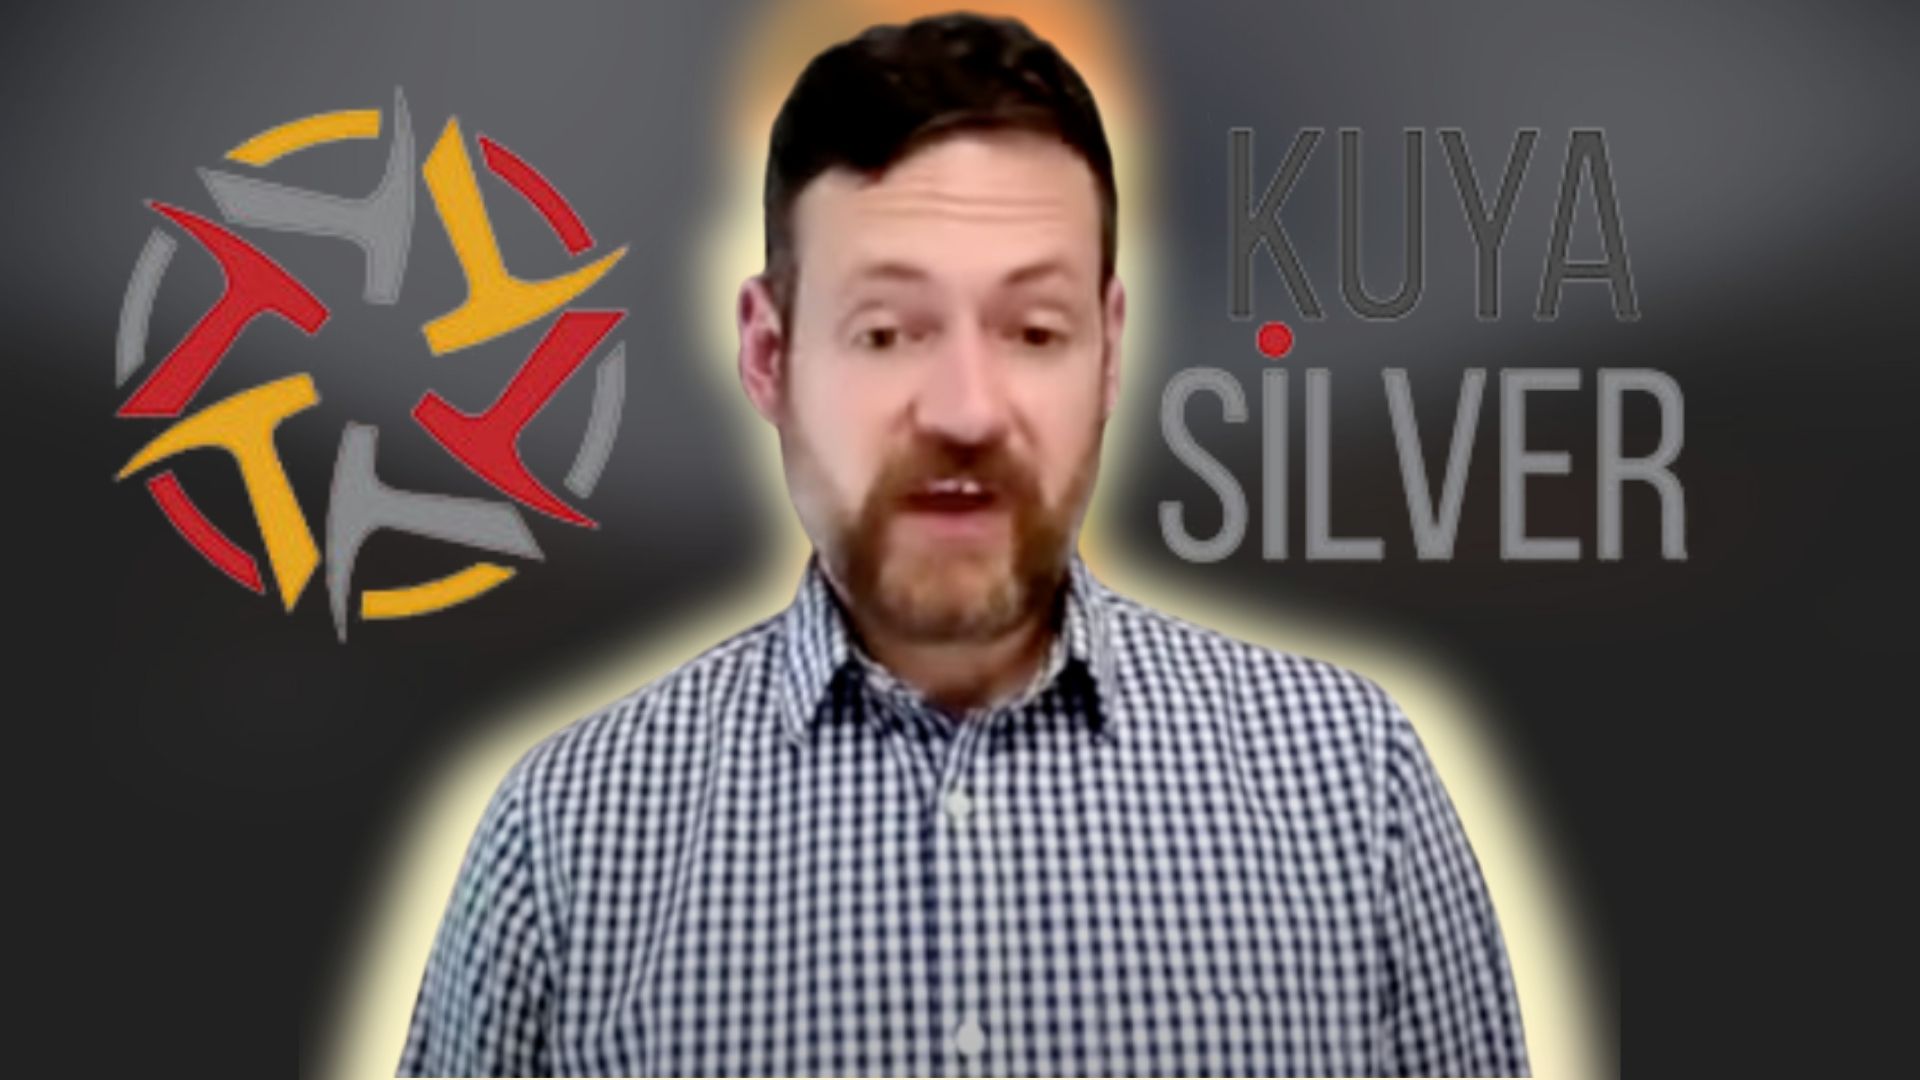 Kuya Silver CEO Interview with David Stein, founder of Kuya Silver